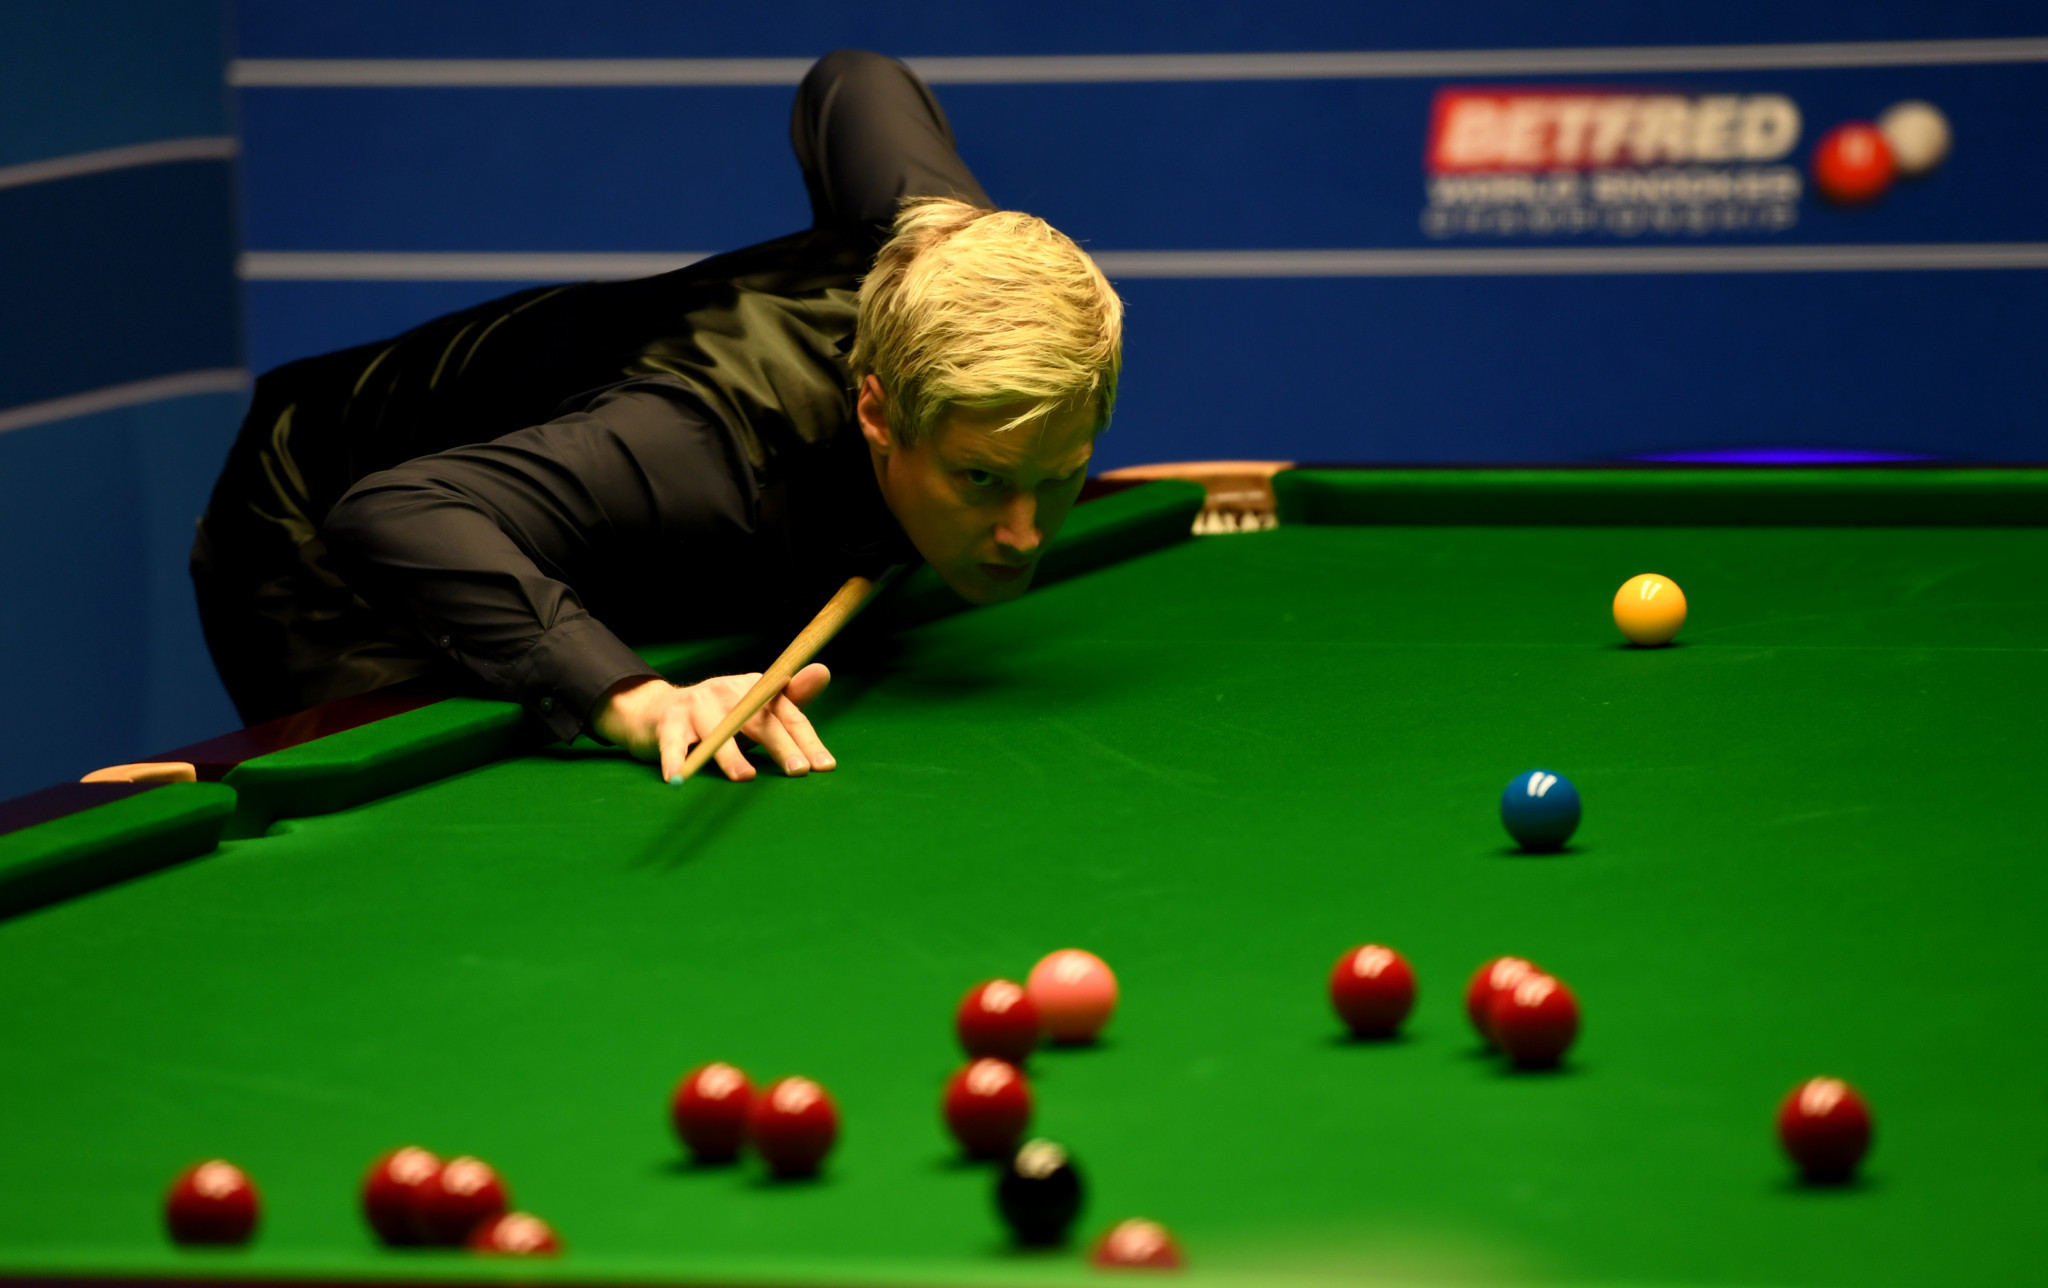 Second seed Neil Robertson trails 11-5 to Mark Selby after the first two sessions of their World Snooker Championship quarter-final ©Getty Images